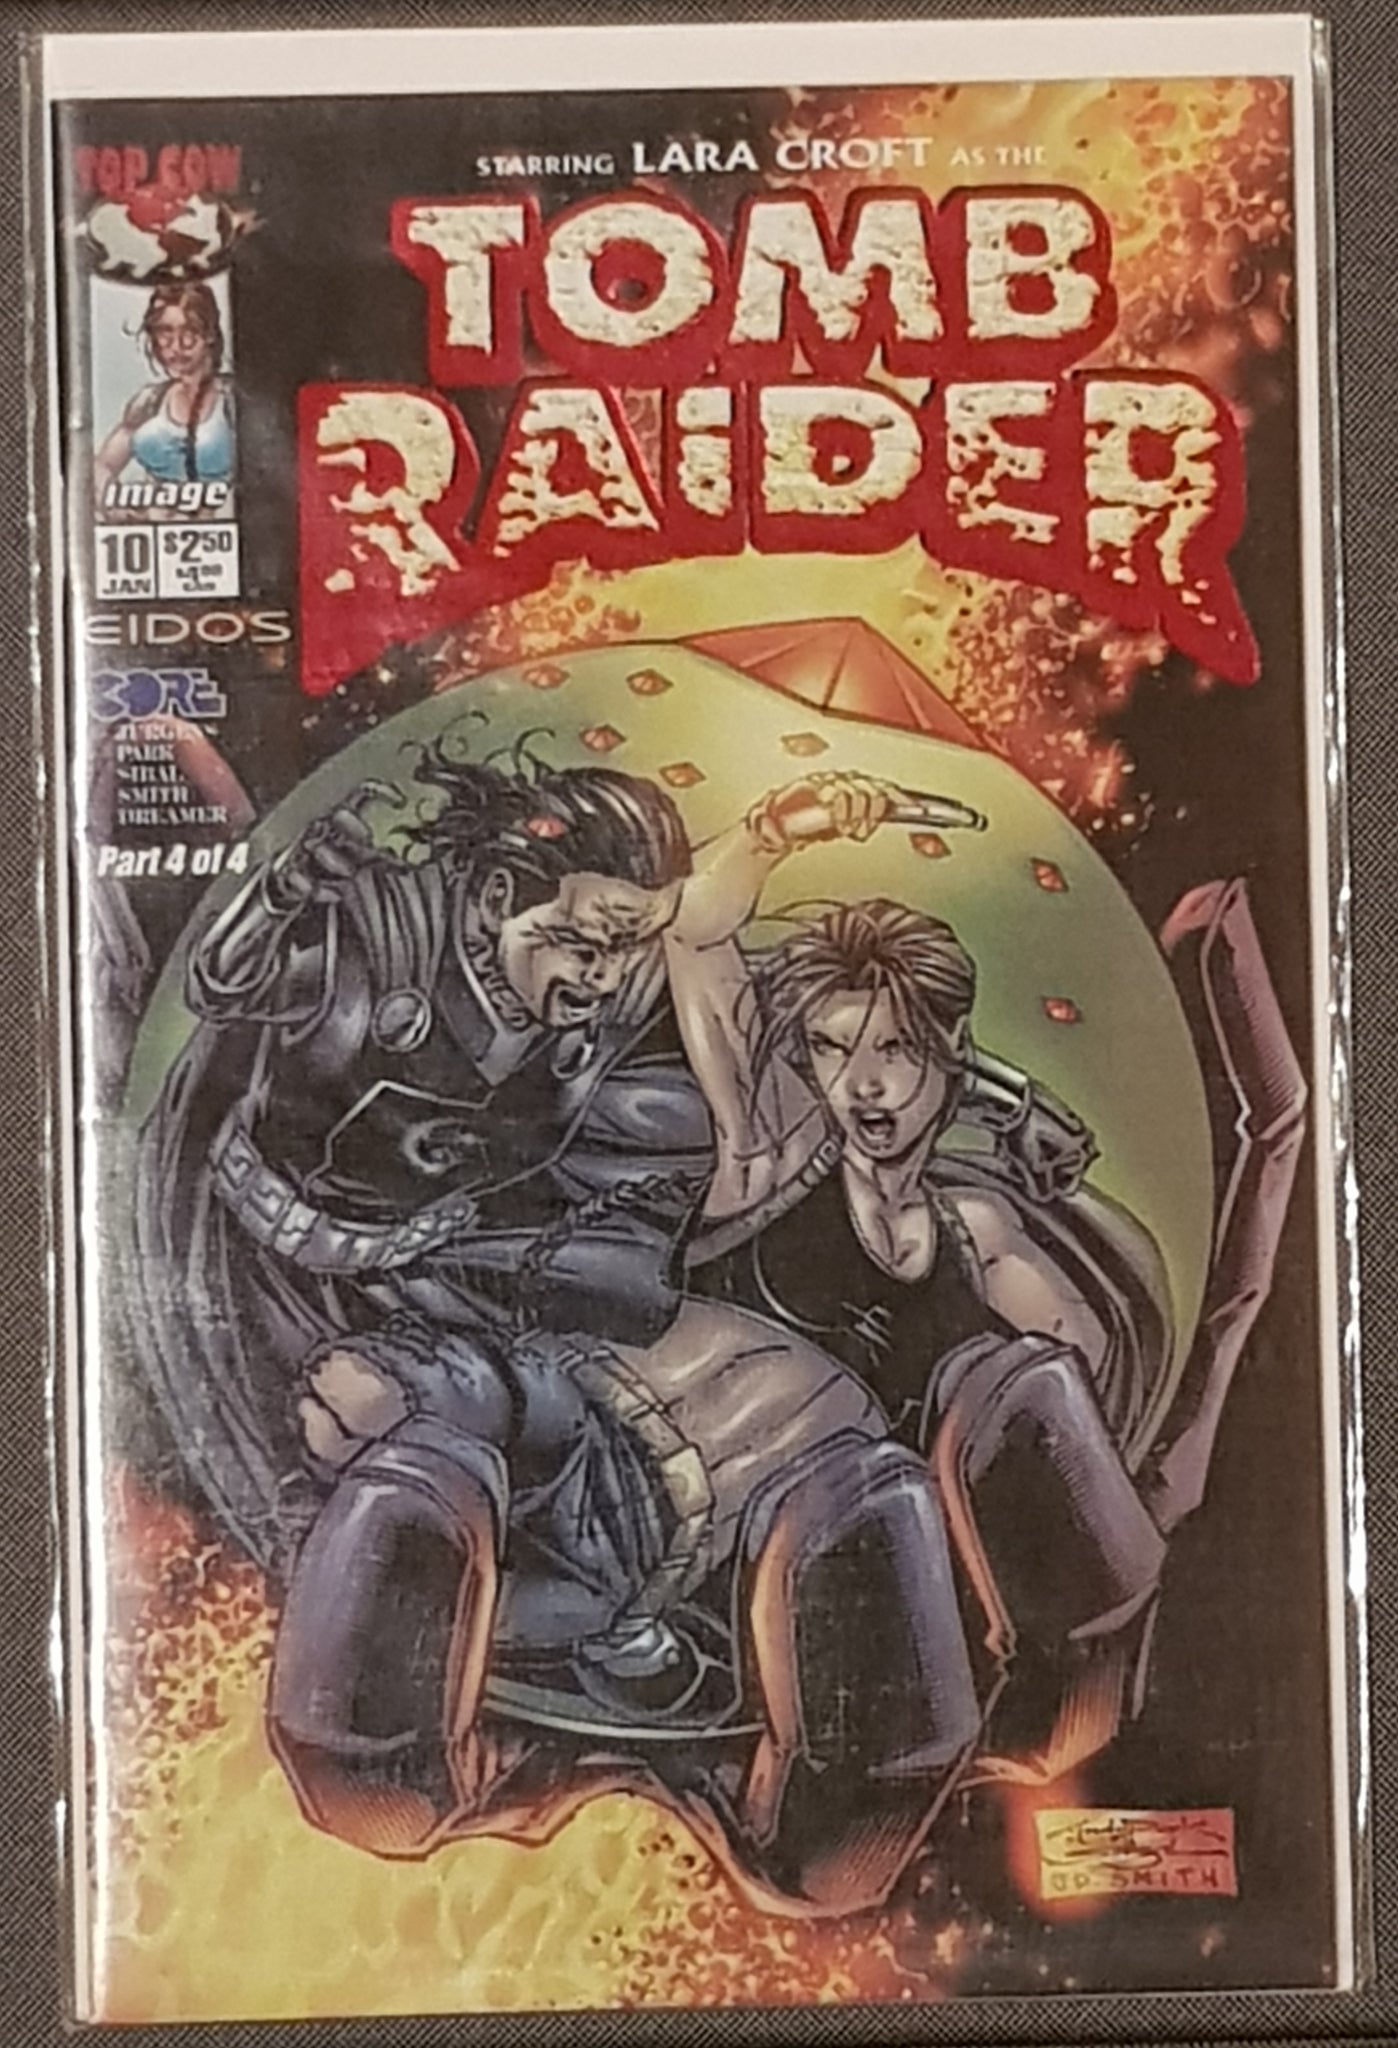 Tomb Raider #10 NM- Dynamic Forces Ruby Red Foil Exclusive Variant